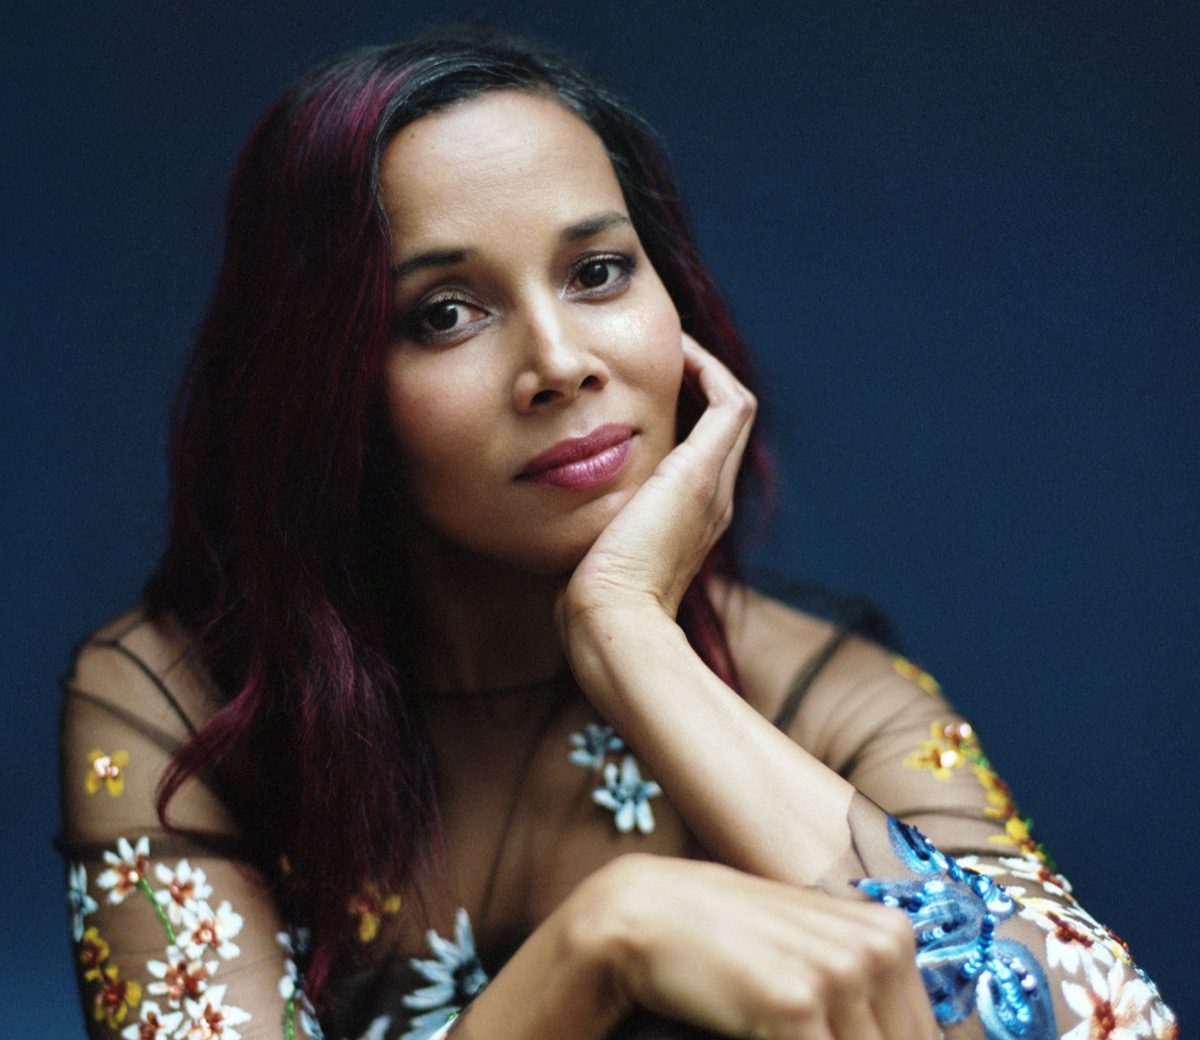 Rhiannon Giddens in embroidered blouse against a rich blue background